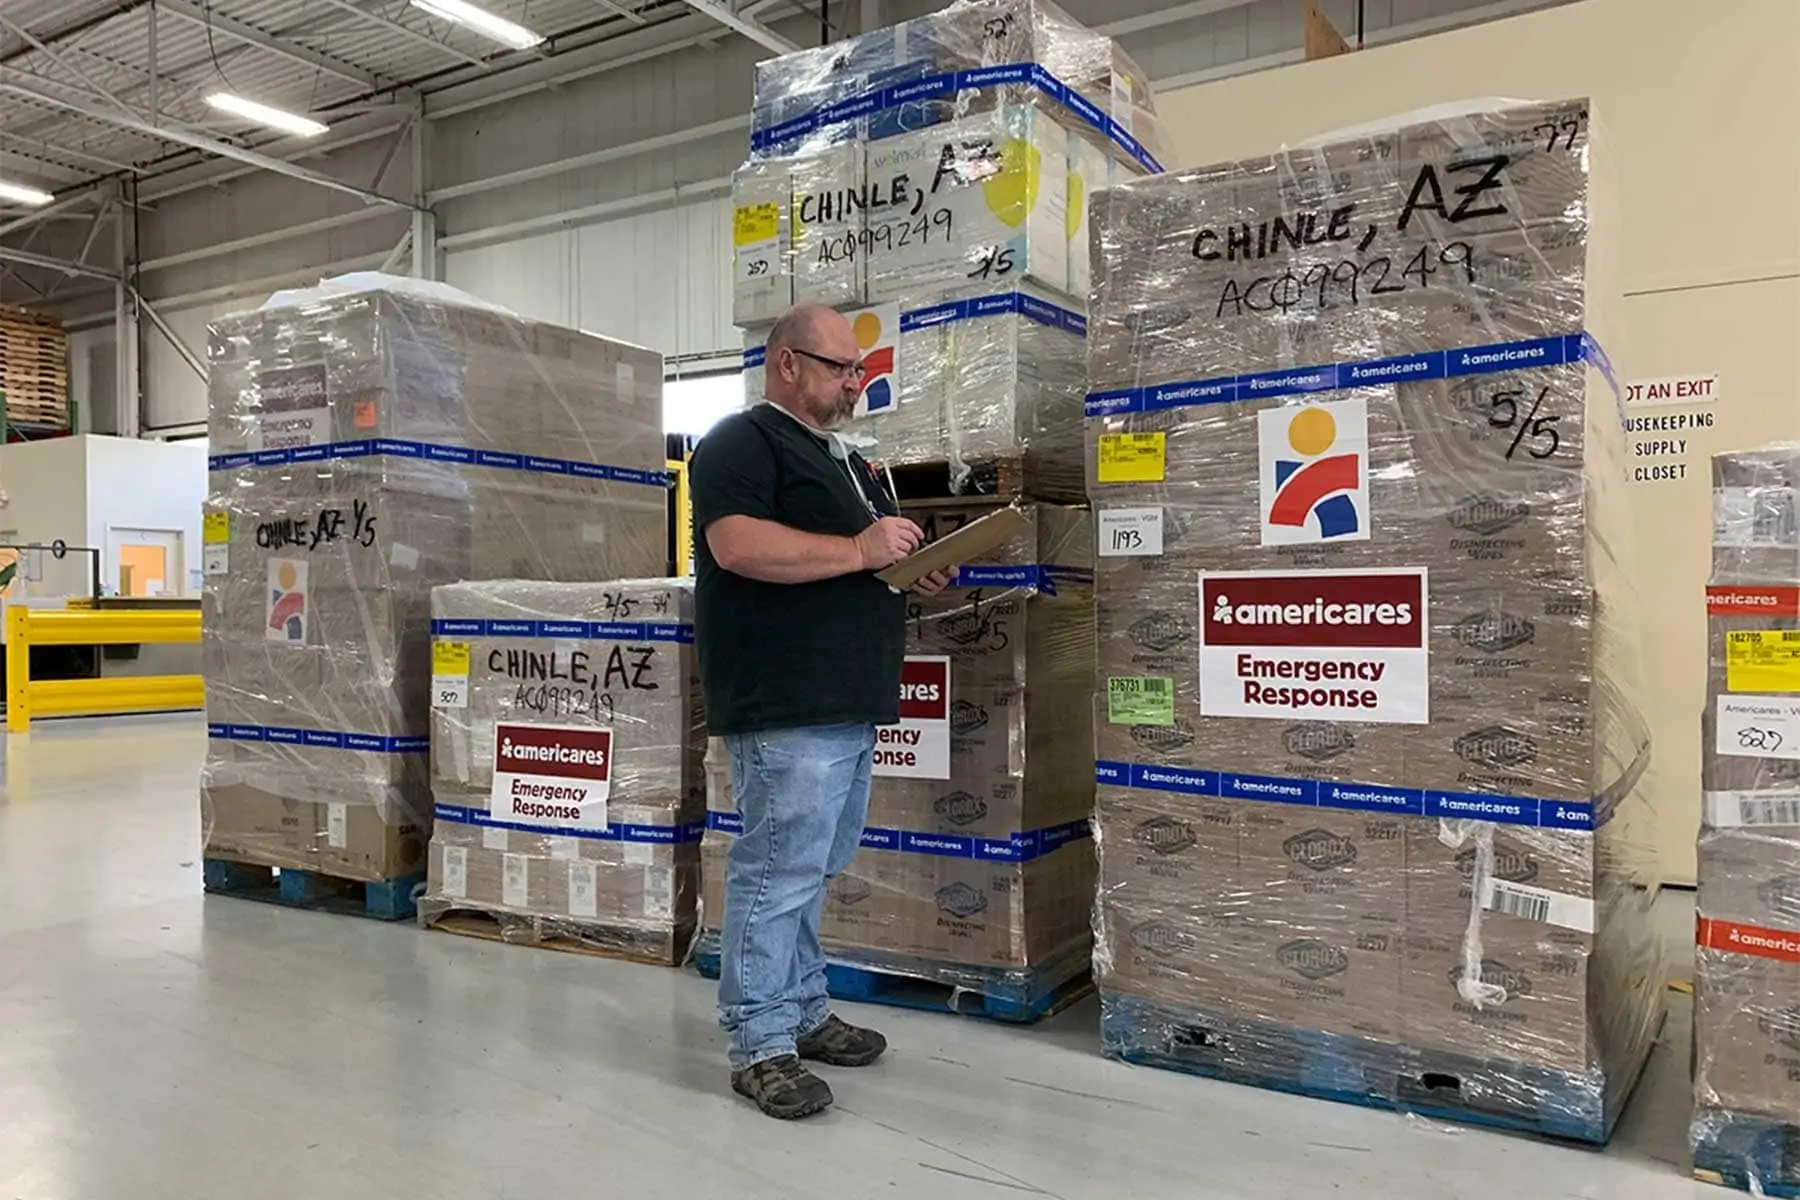 Workers at Americares distribution center in Stamford, Conn., prepare shipments of personal protective gear, disinfectants and hygiene products for Native American communities affected by the COVID-19 pandemic in Arizona, New Mexico and Nevada. Photo courtesy of Americares.